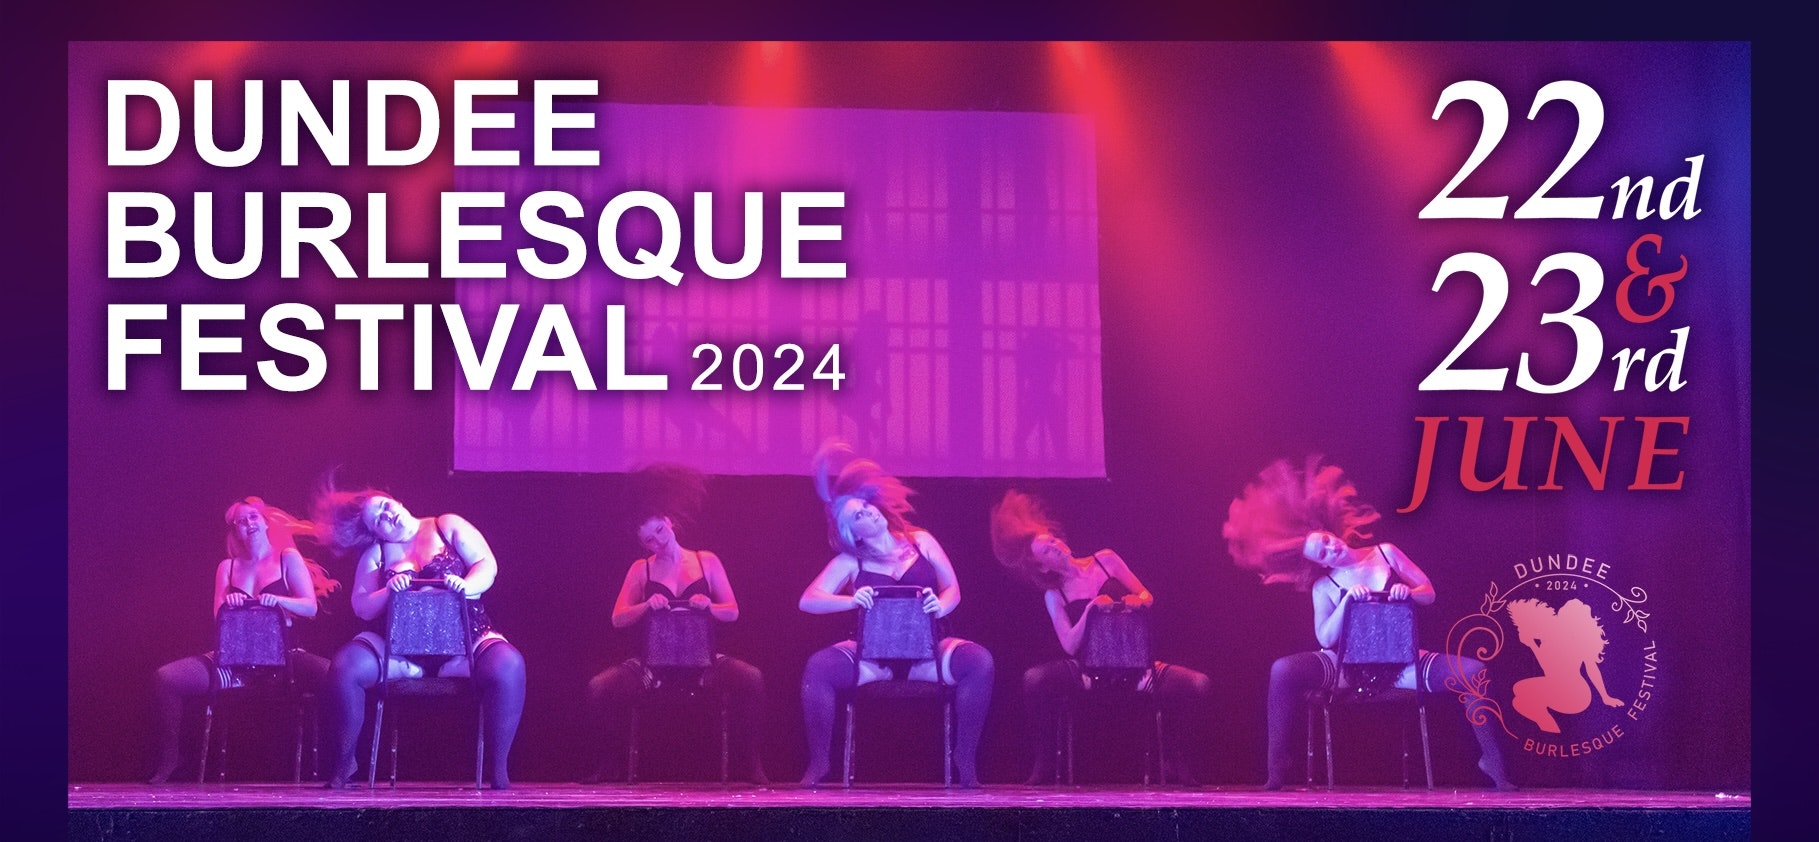 Dundee Burlesque Festival – One For The Road Show Live